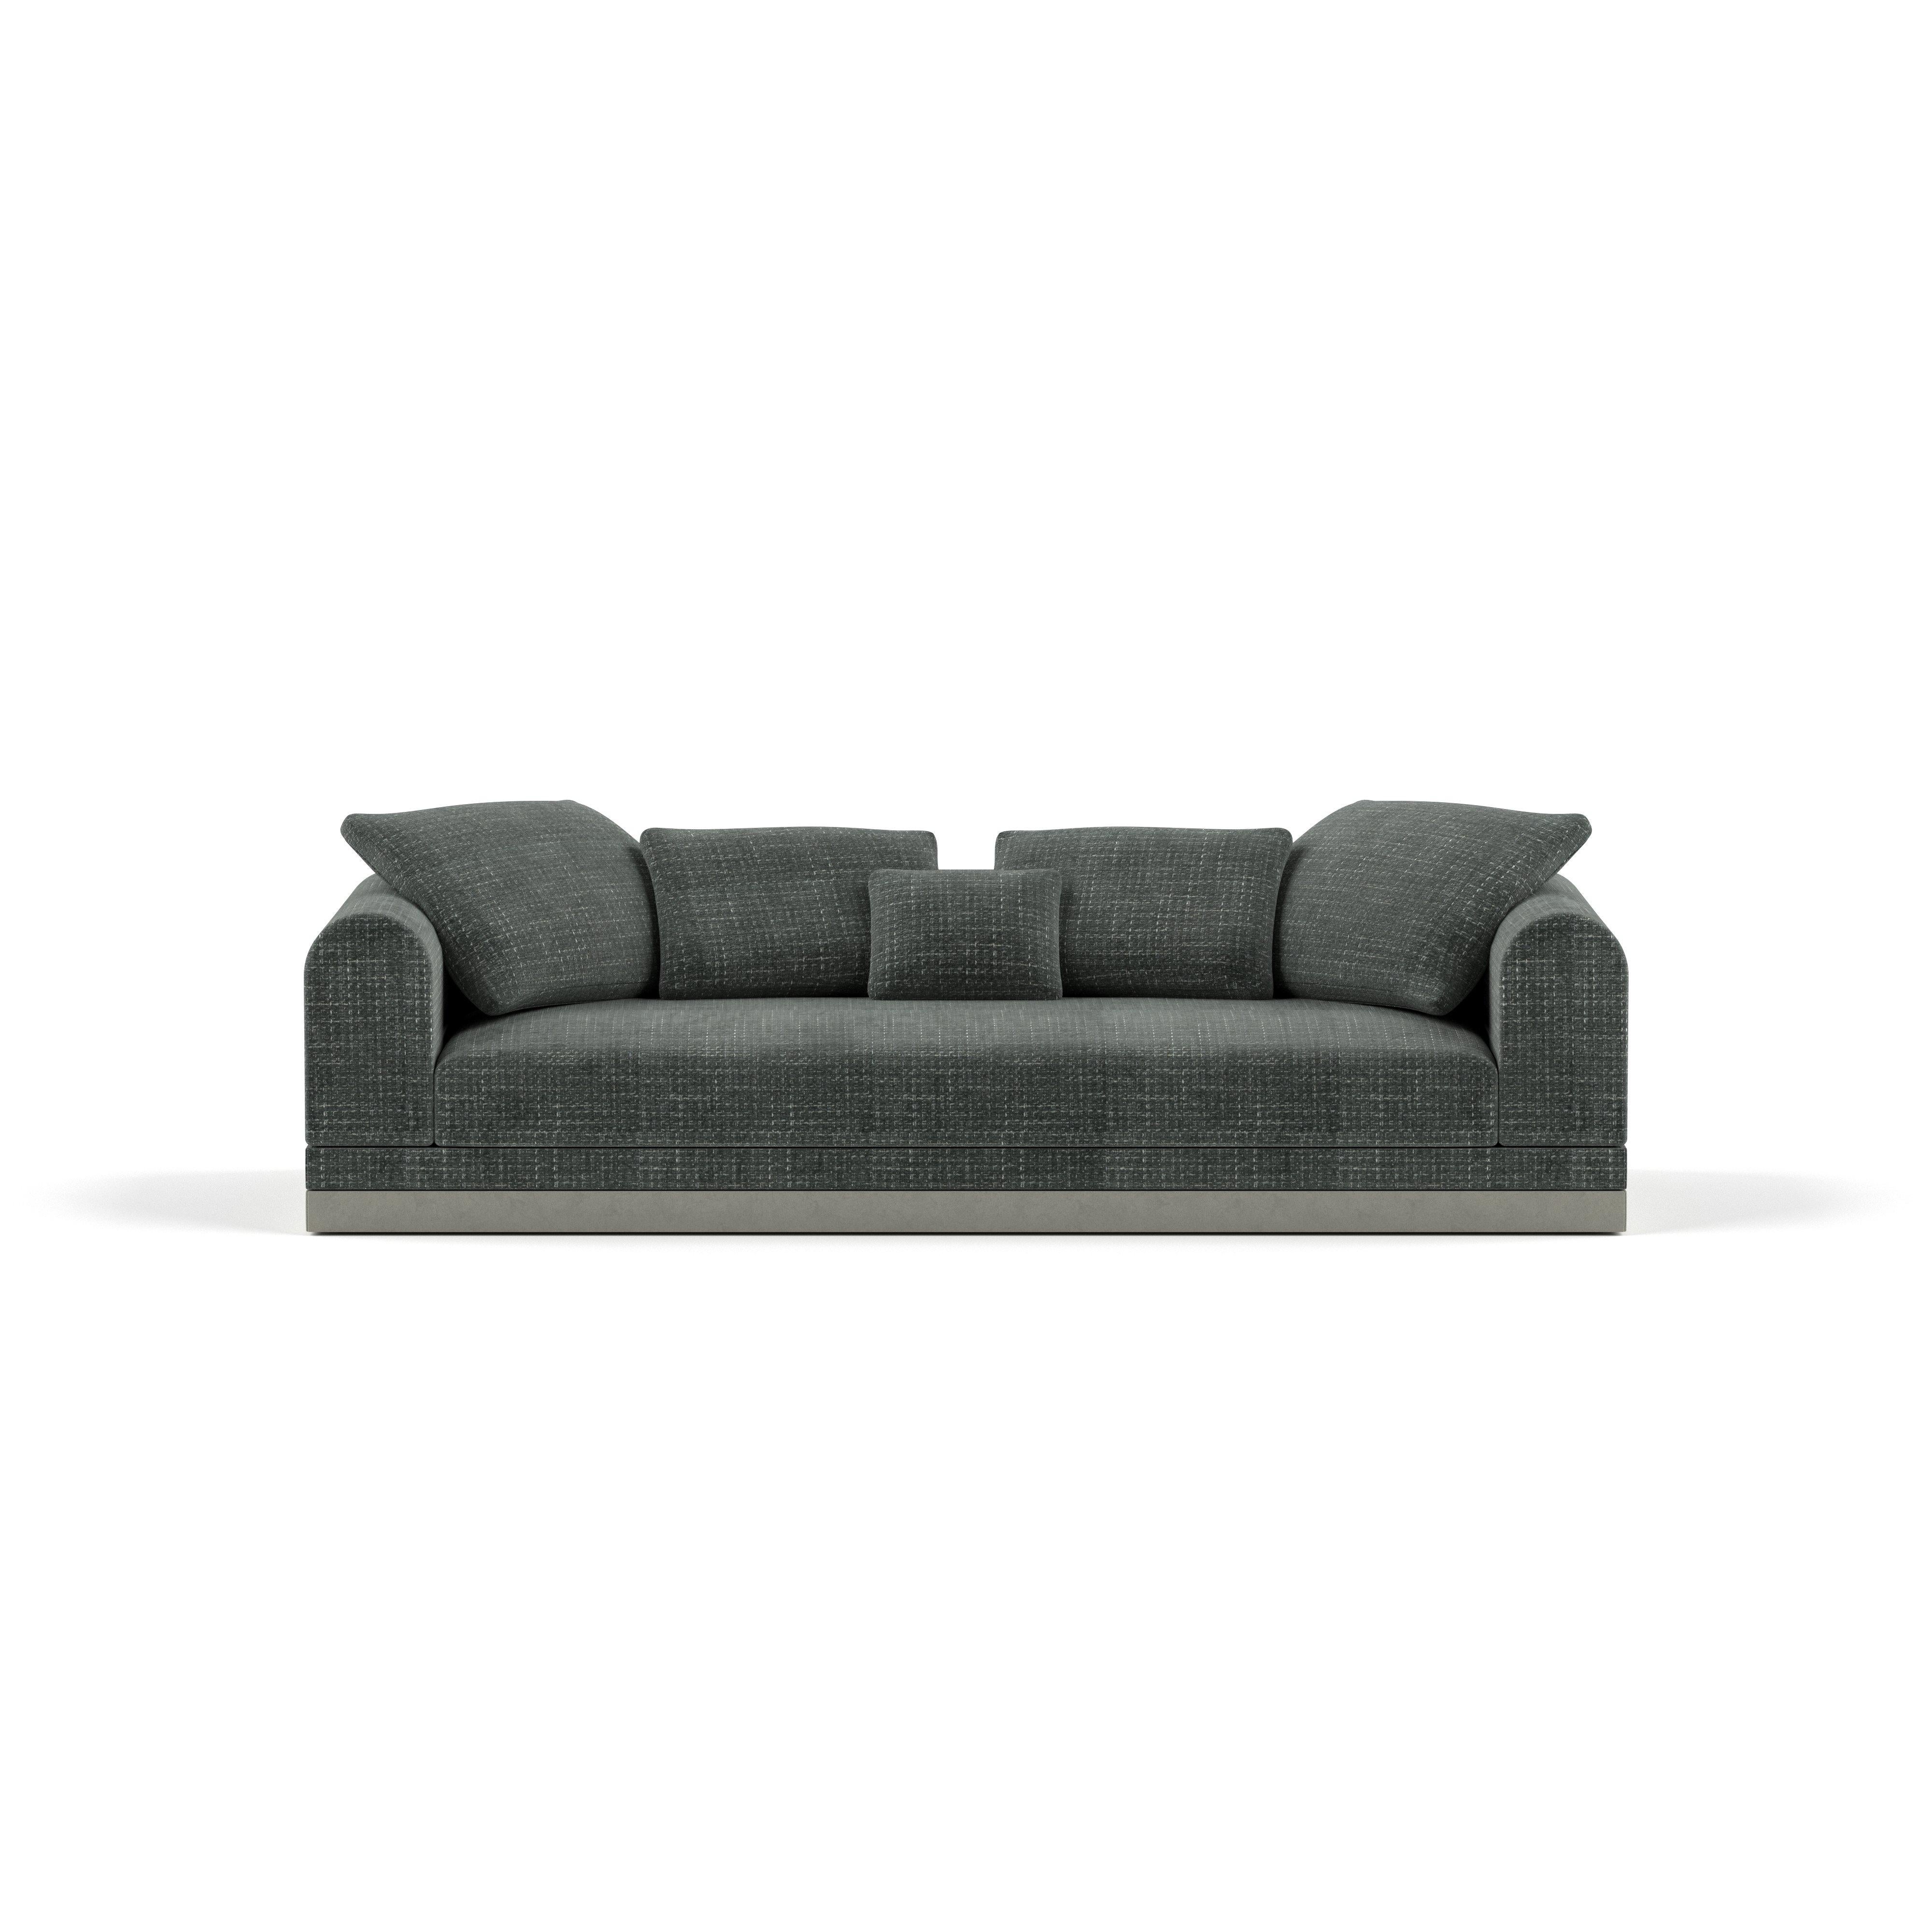 Contemporary sofa 'Aqueduct' by Poiat.
Measures: small version : H. 77 cm x W. 255.5 cm x D. 102 cm (SH 40 cm).

Aqueduct collection 2022 by Timo Mikkonen & Antti Rouhunkoski.

upholstery: Larsen - Yang 95.
Plinth: low plinth.

The Aqueduct